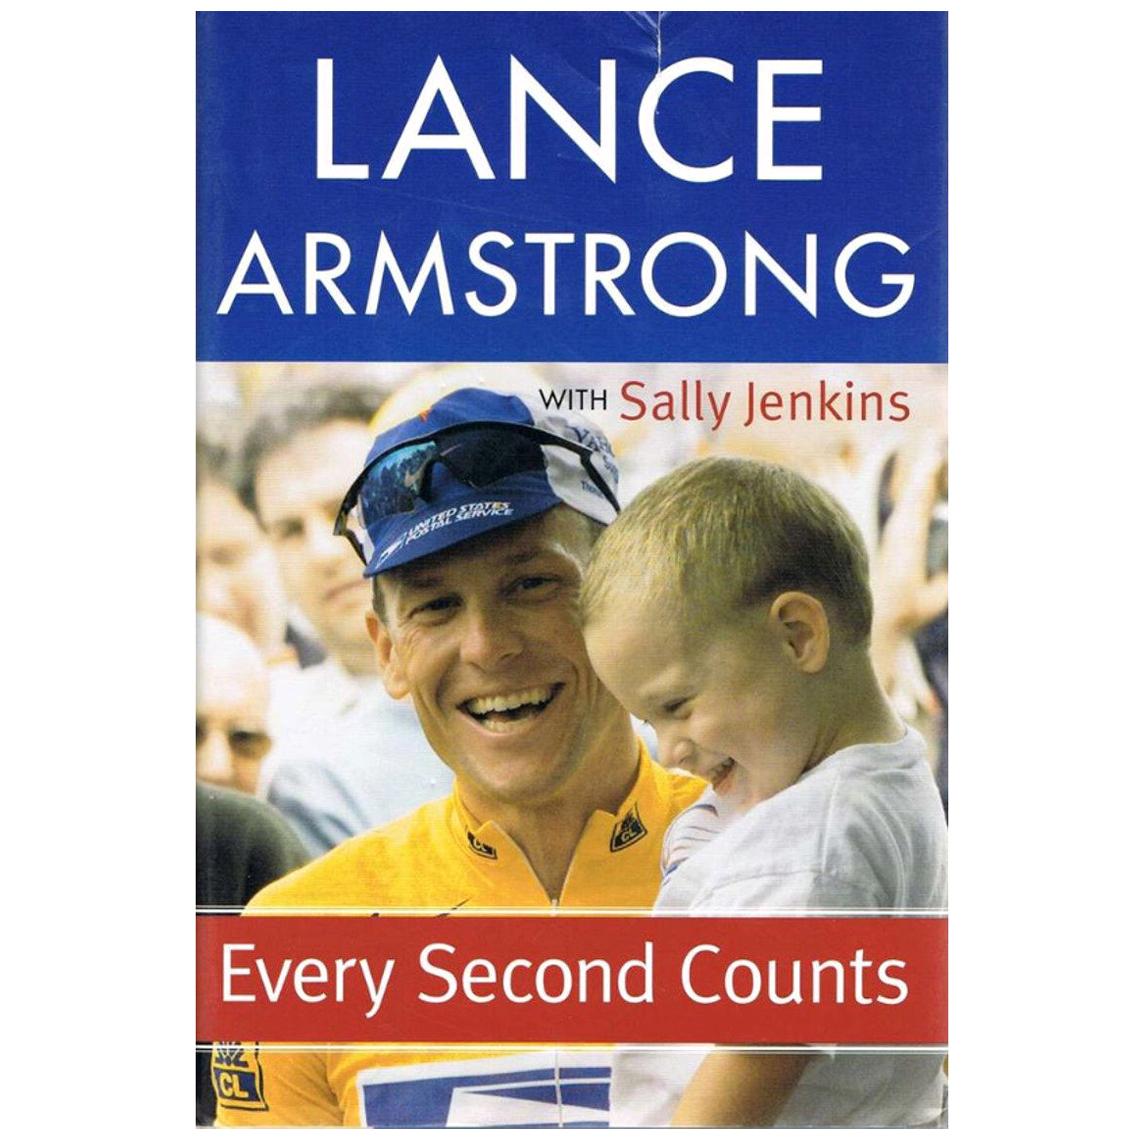 Lance Armstrong Autograph on a Copy of His Autobiography, 21st Century For Sale